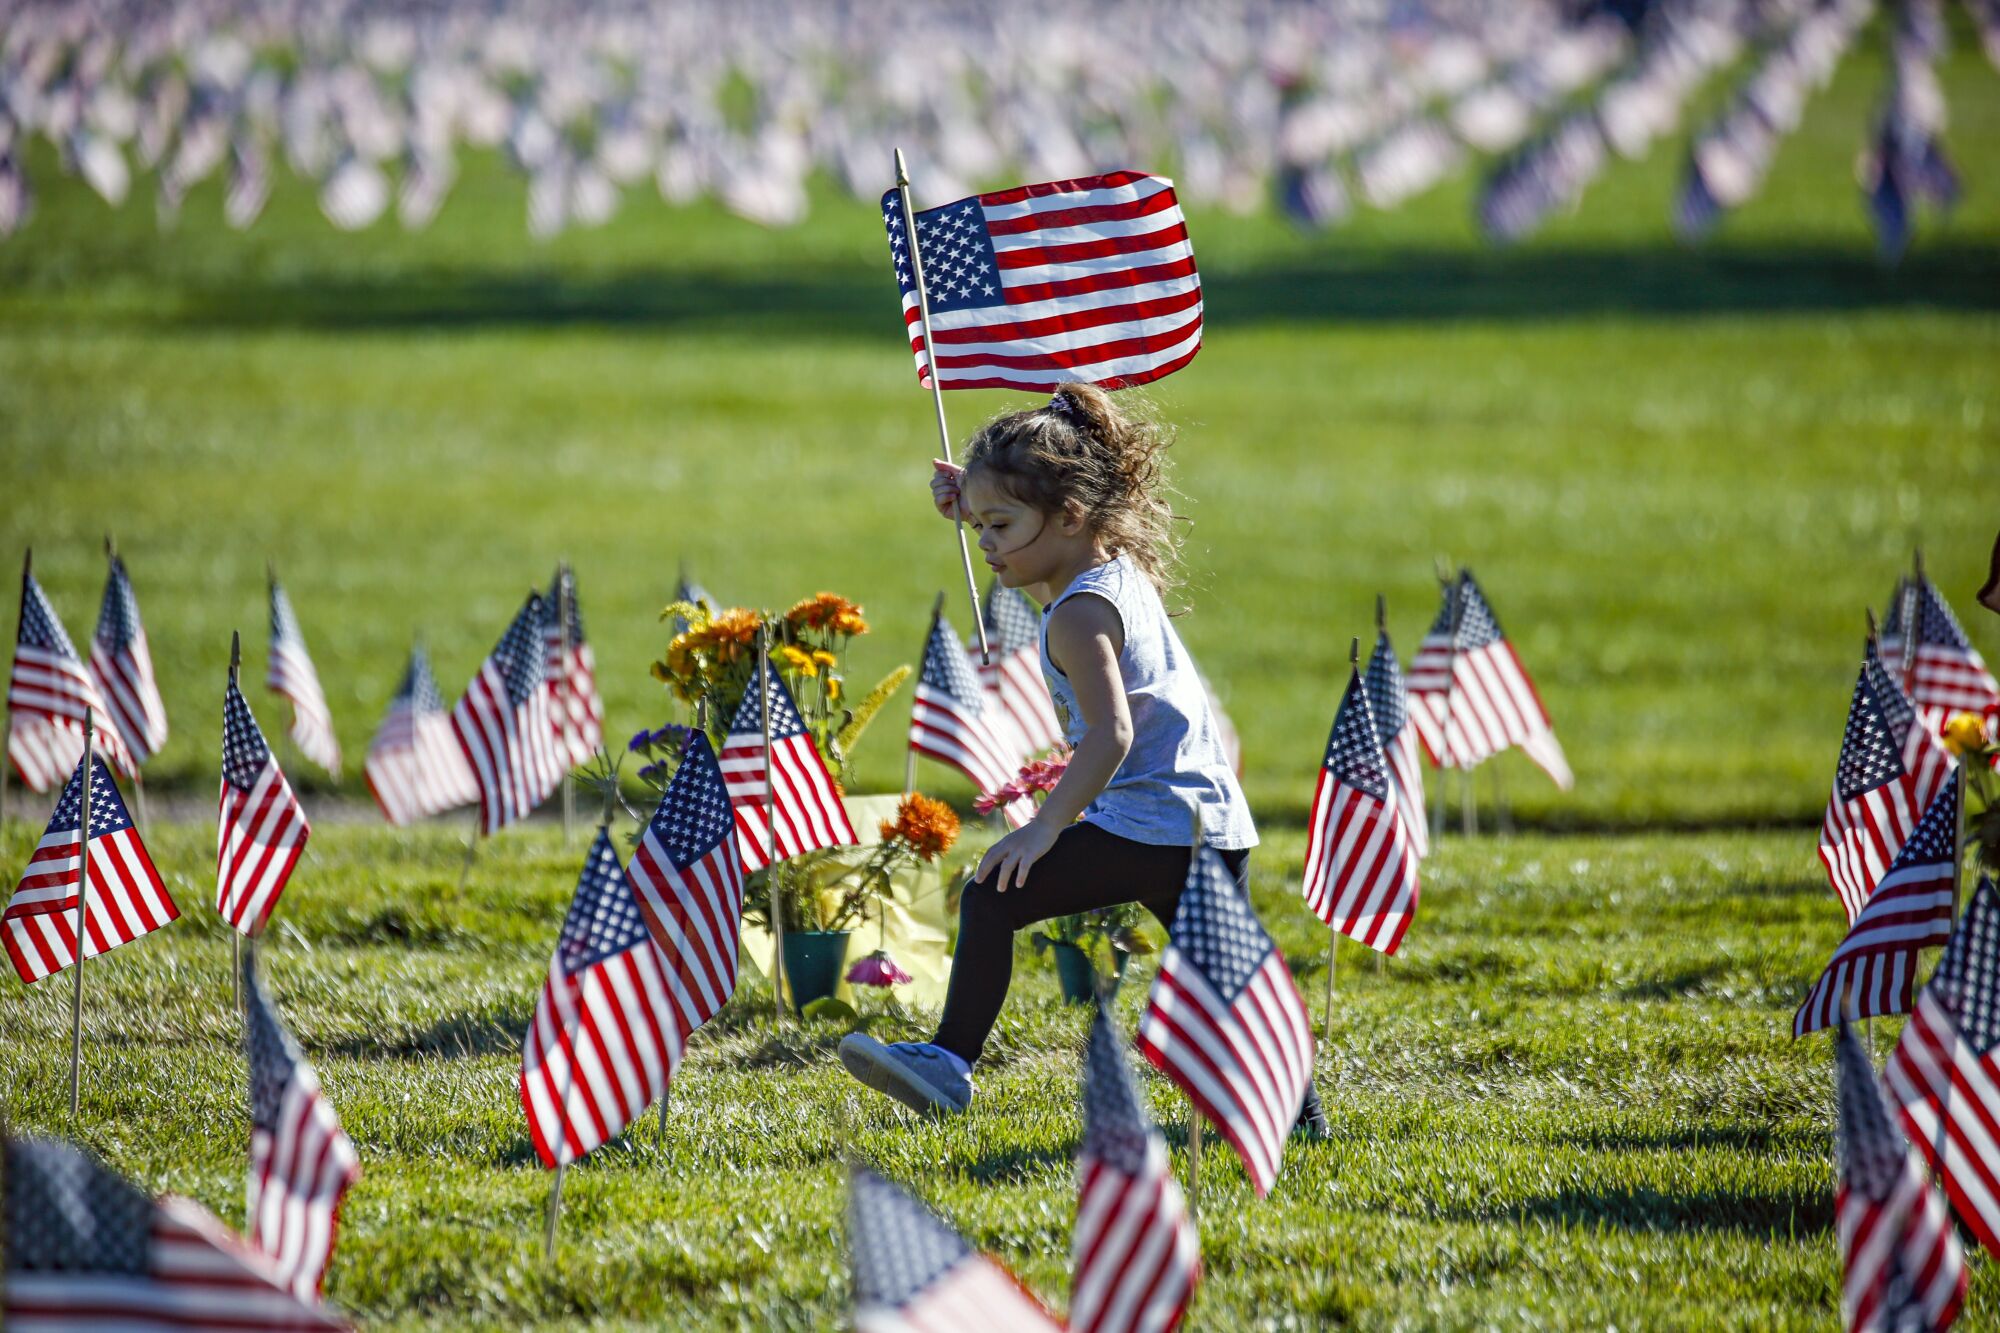 A young girl carries a U.S. flag while running among small flags planted in the grass